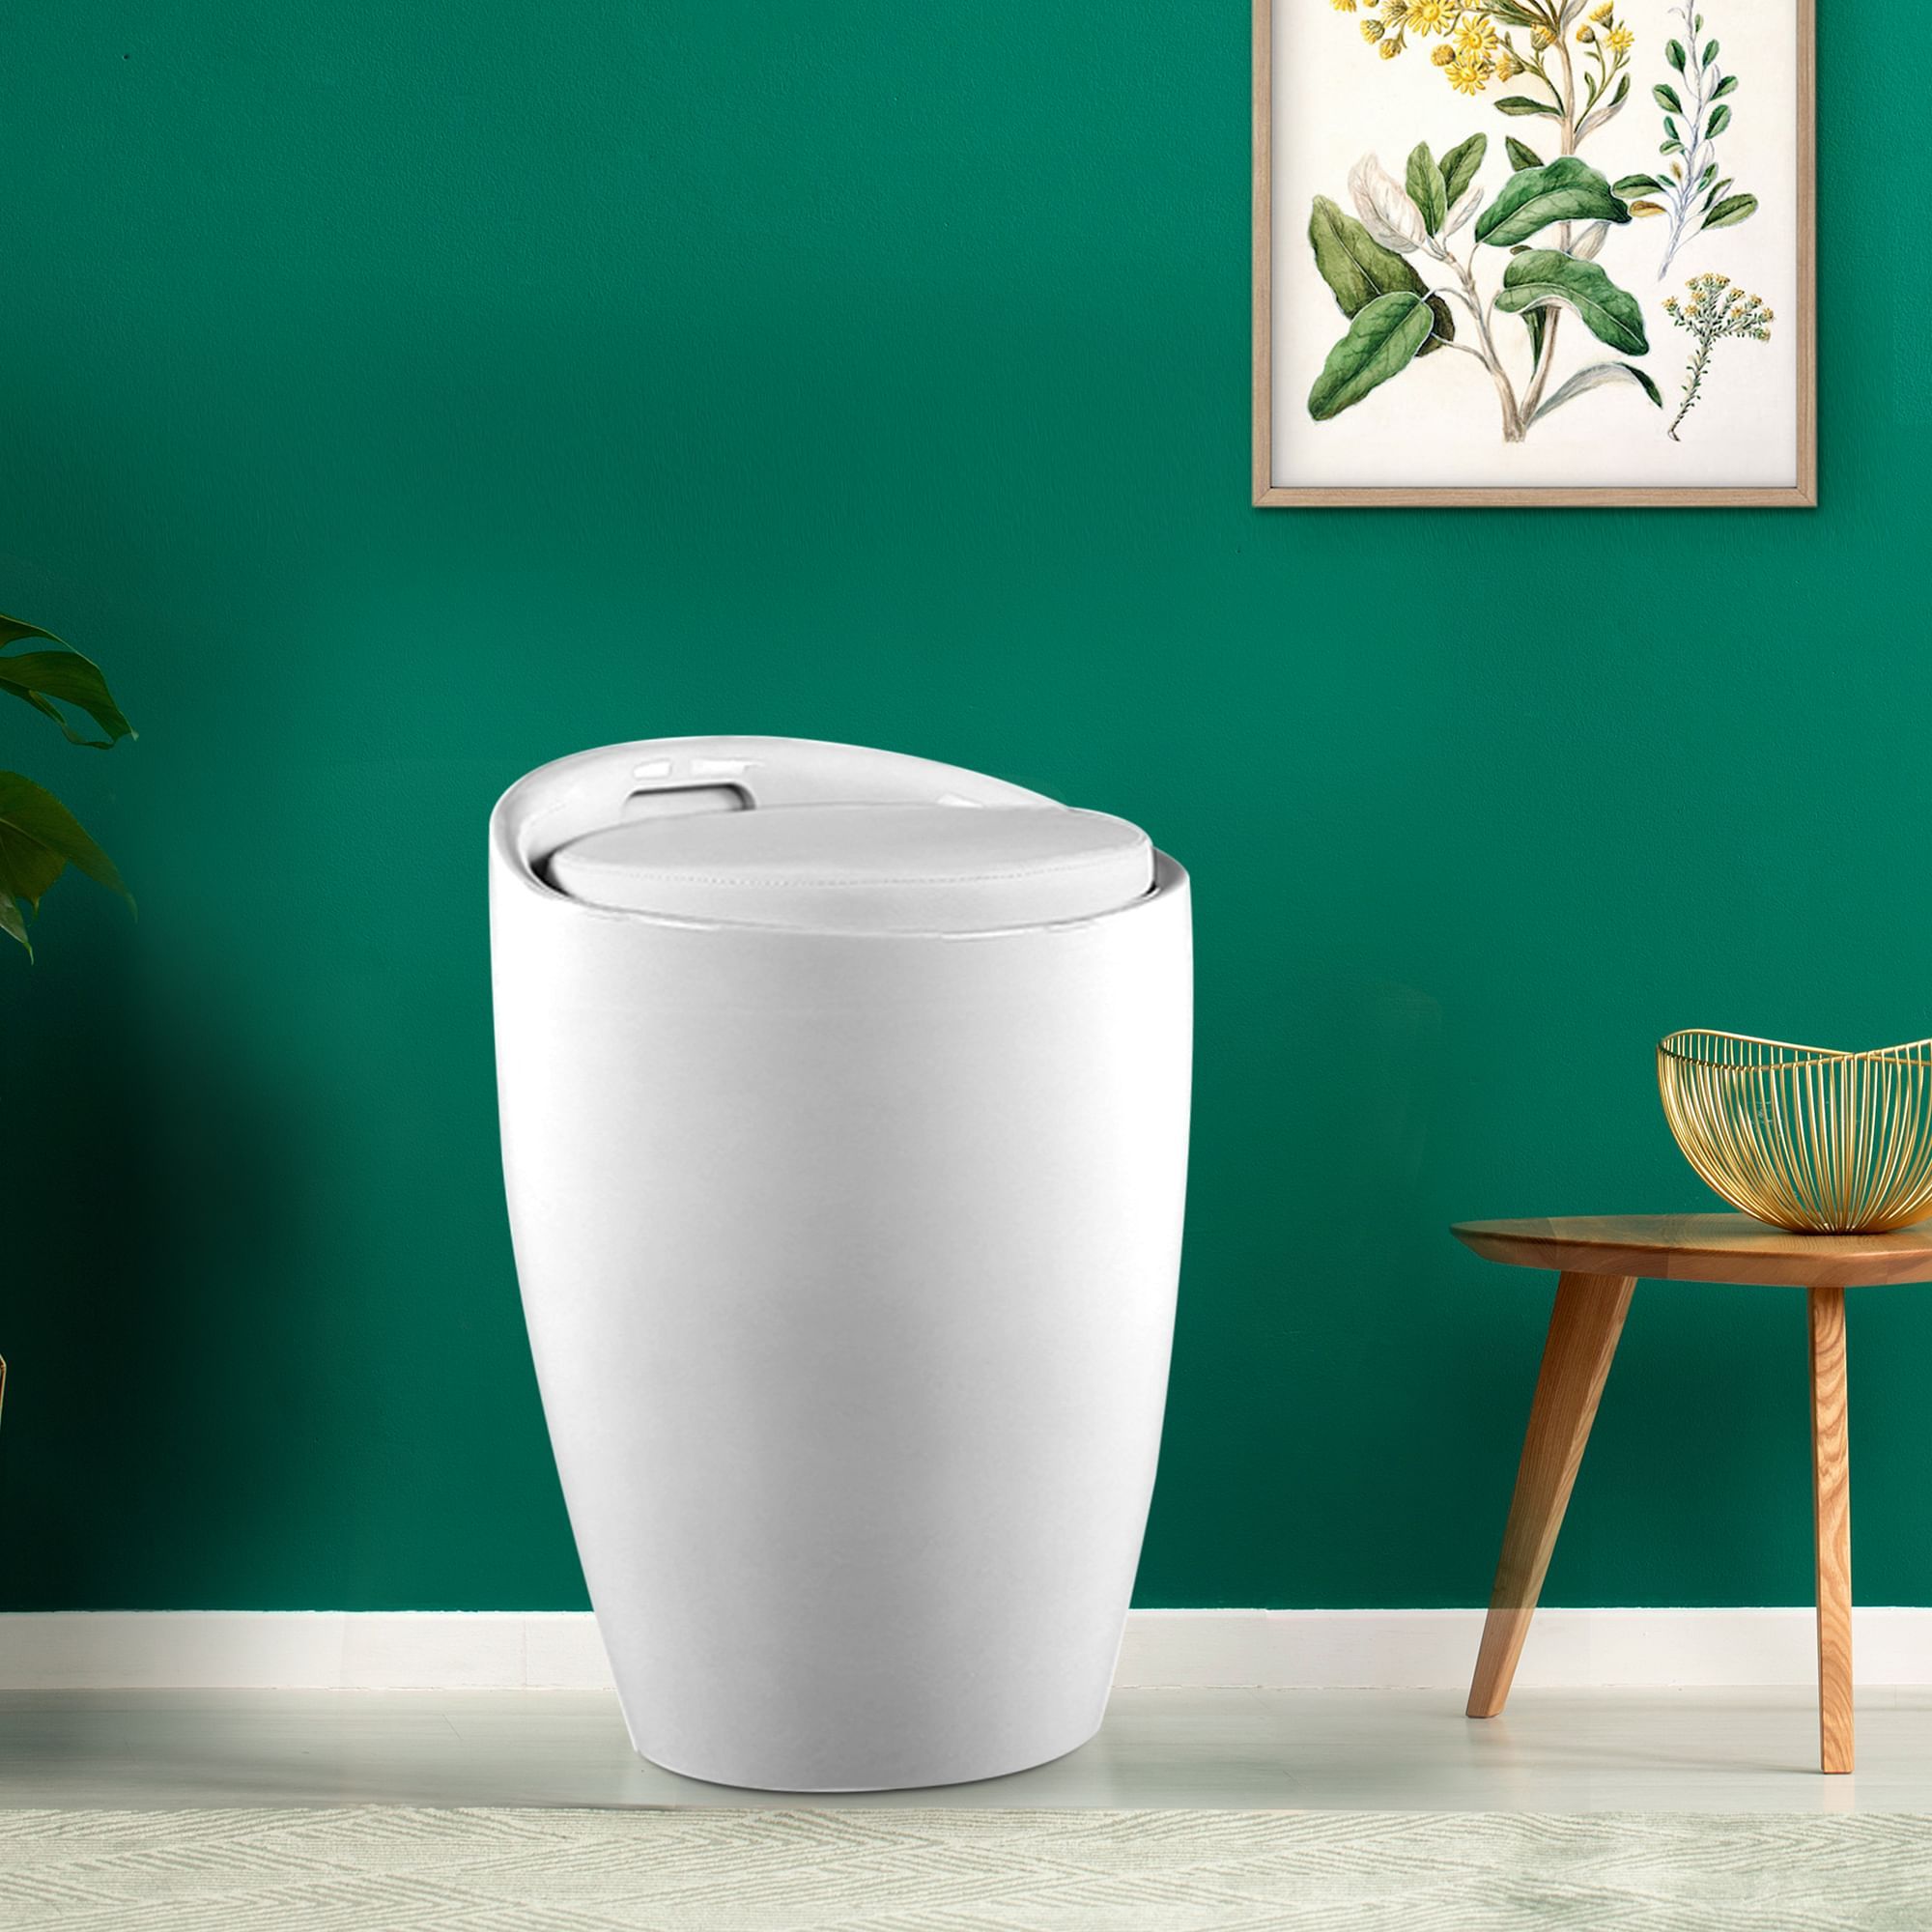 Luna ABS Stool in White Colour